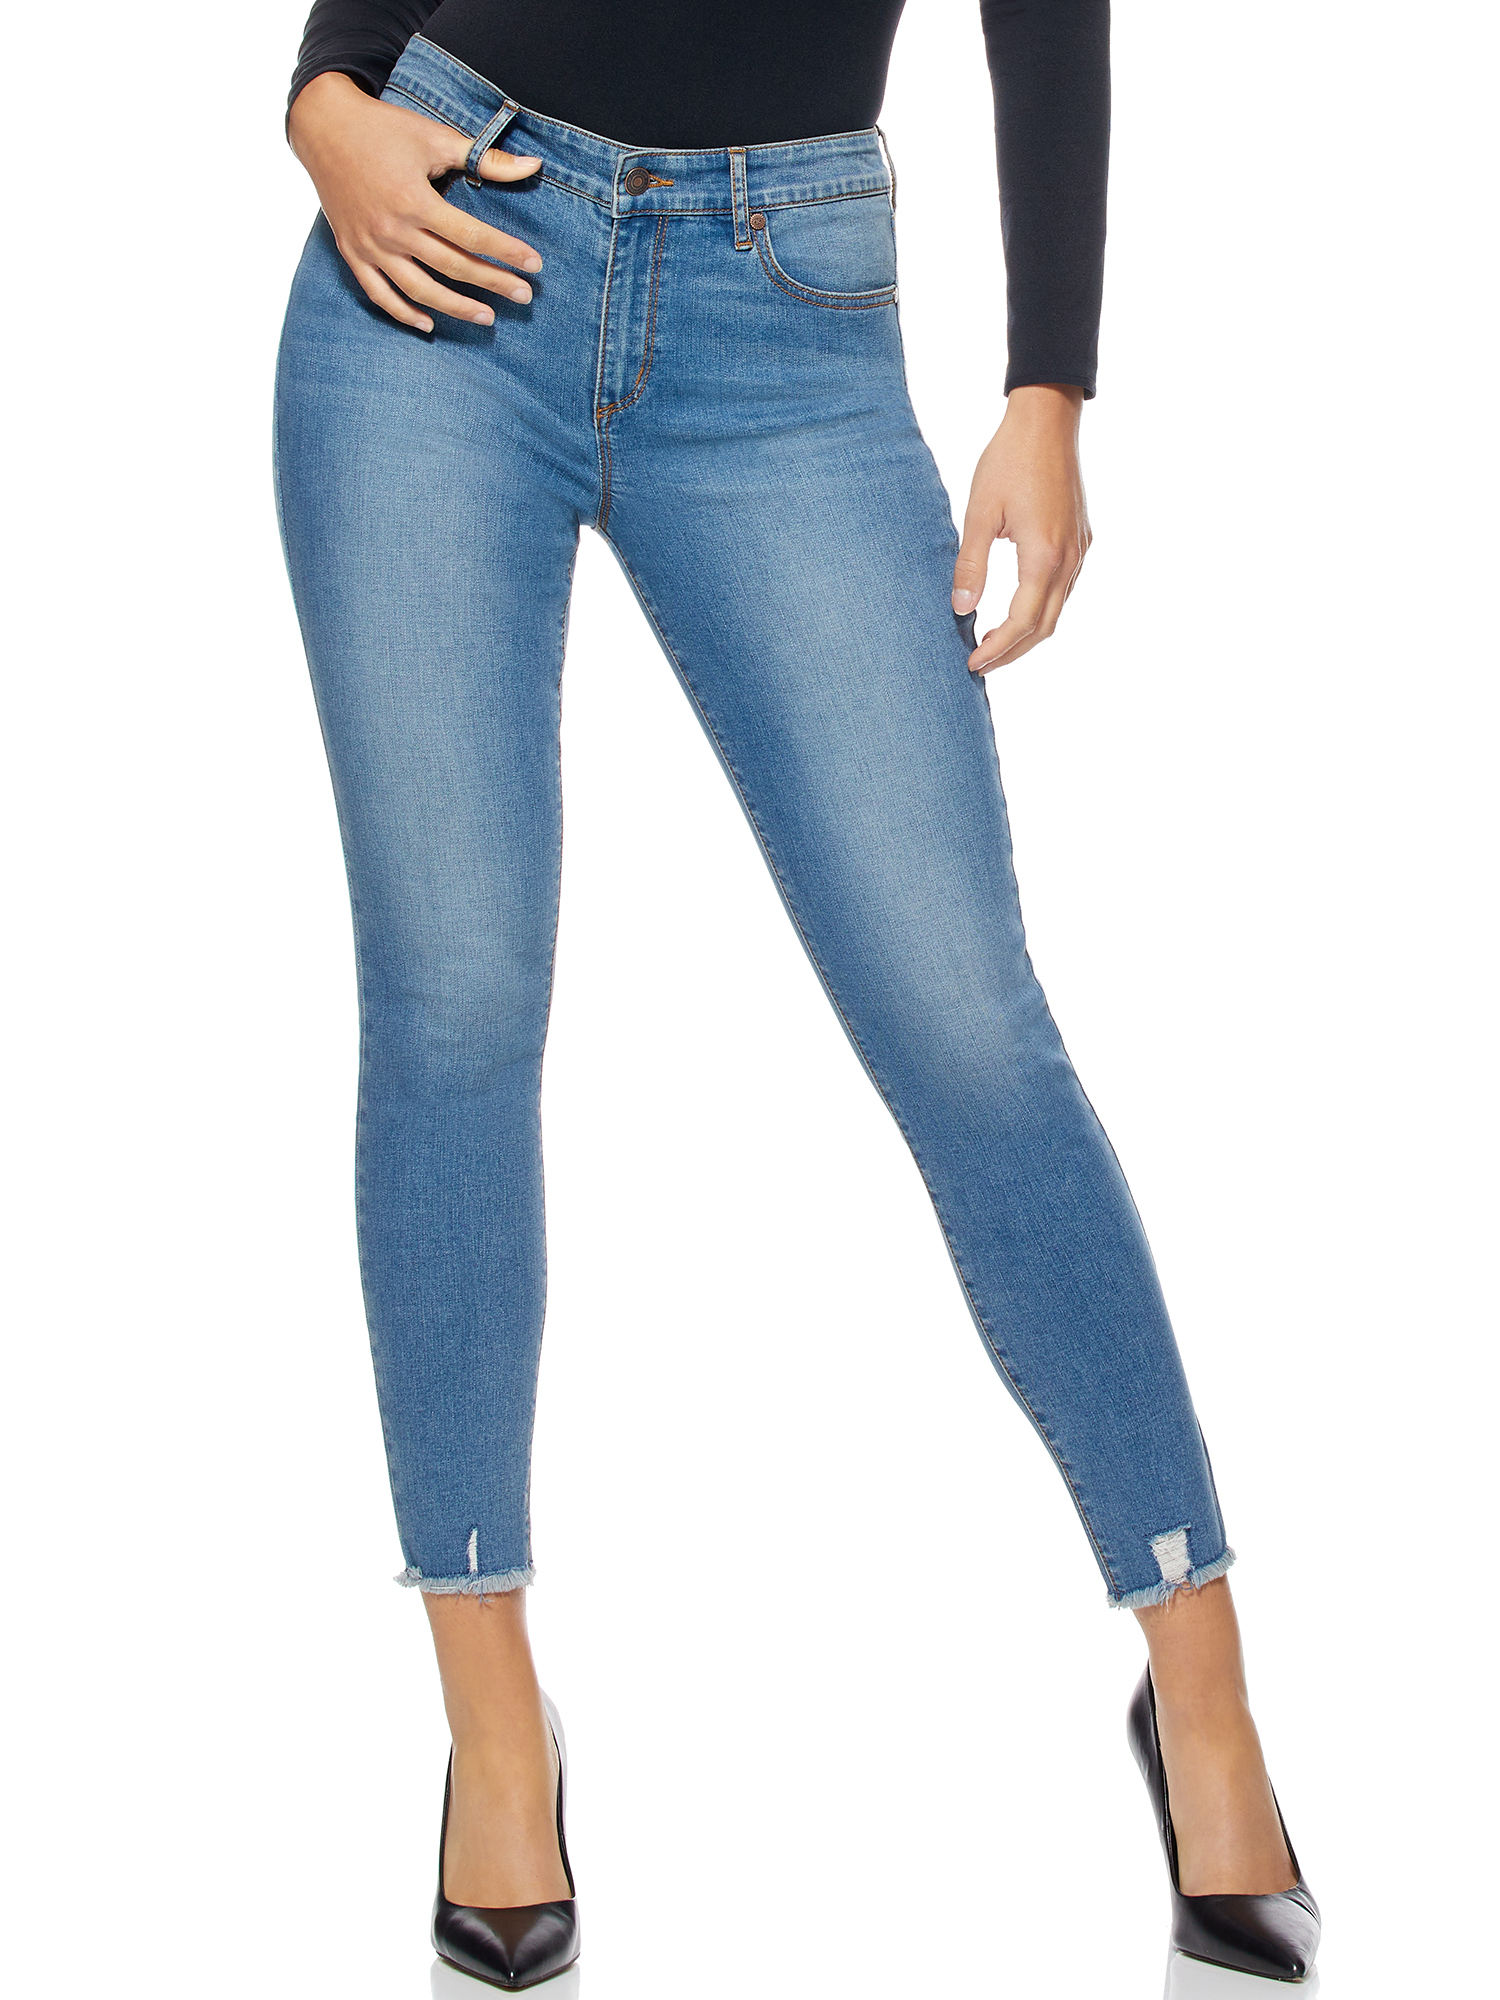 Sofia Jeans Women's Rosa Curvy High Rise Destructed Skinny Ankle Jeans - image 1 of 7